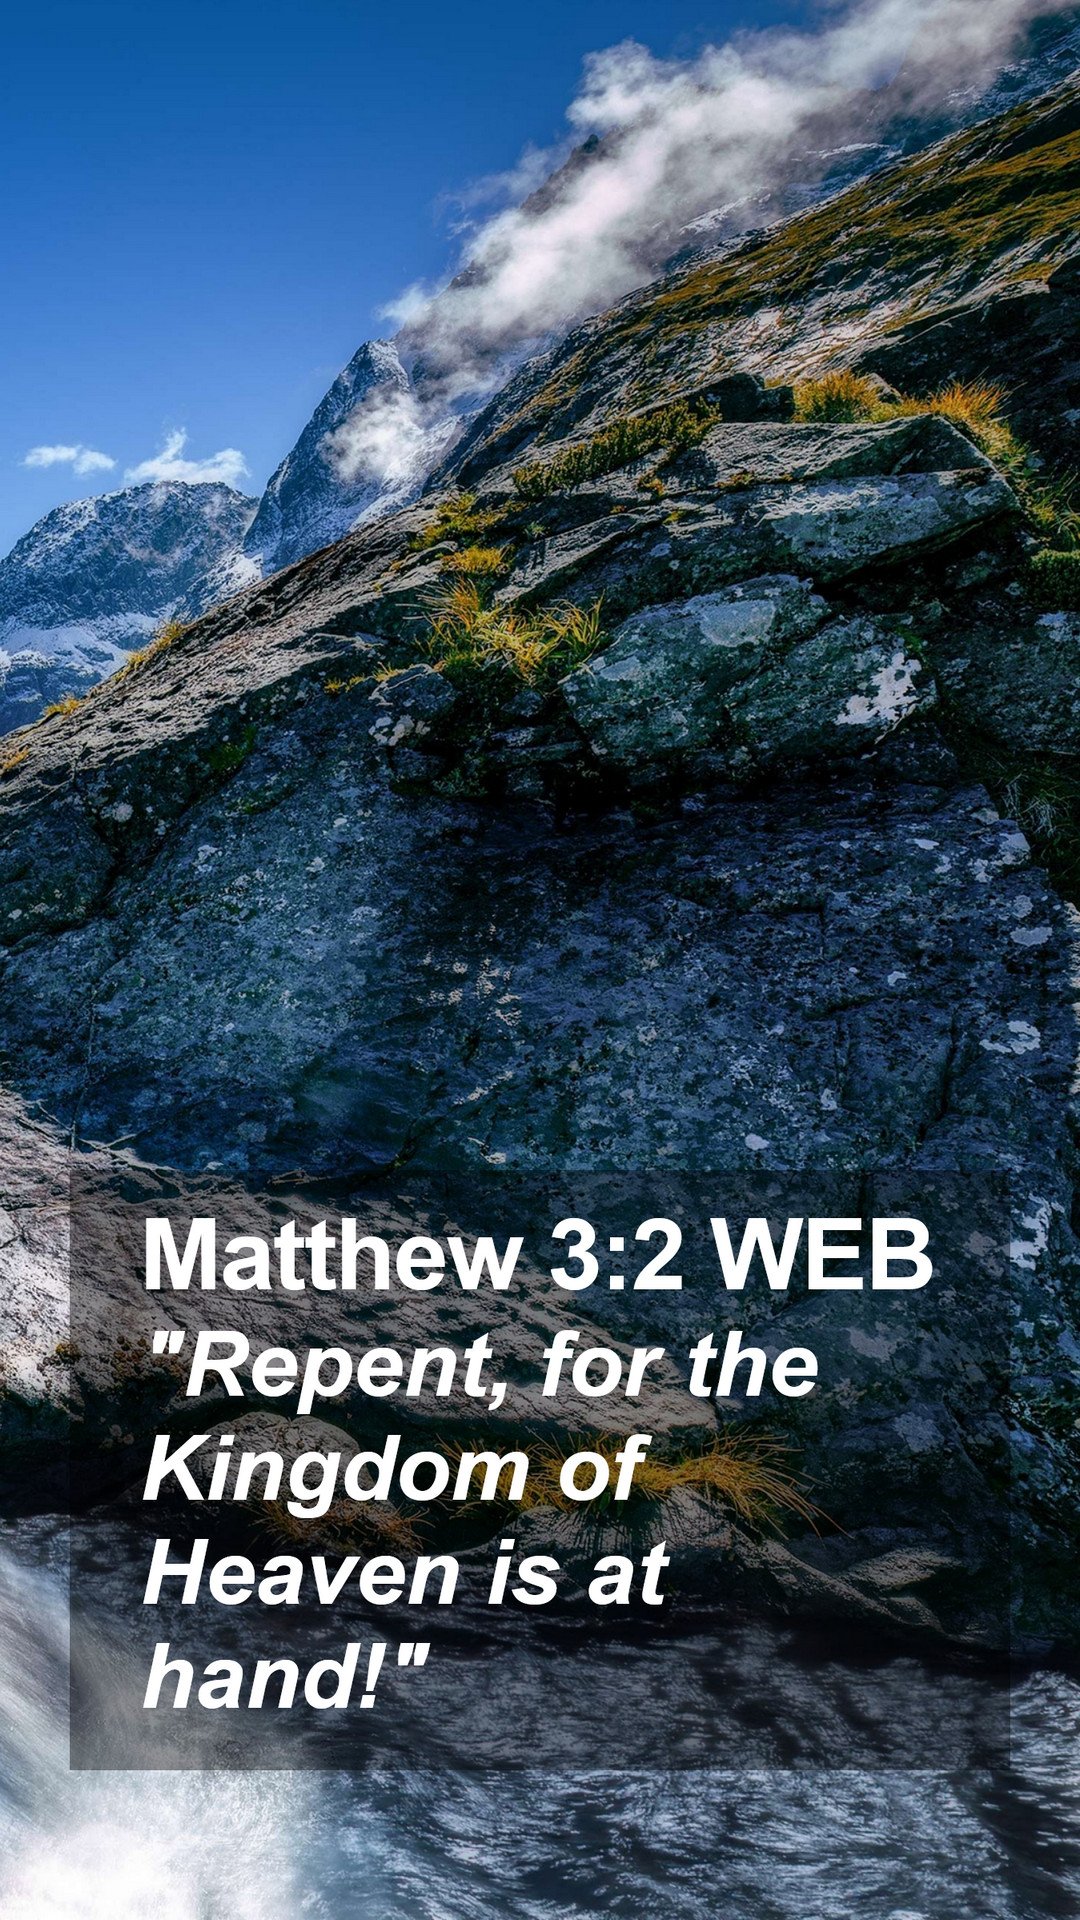 Matthew 3:2 WEB Mobile Phone Wallpaper, for the Kingdom of Heaven is